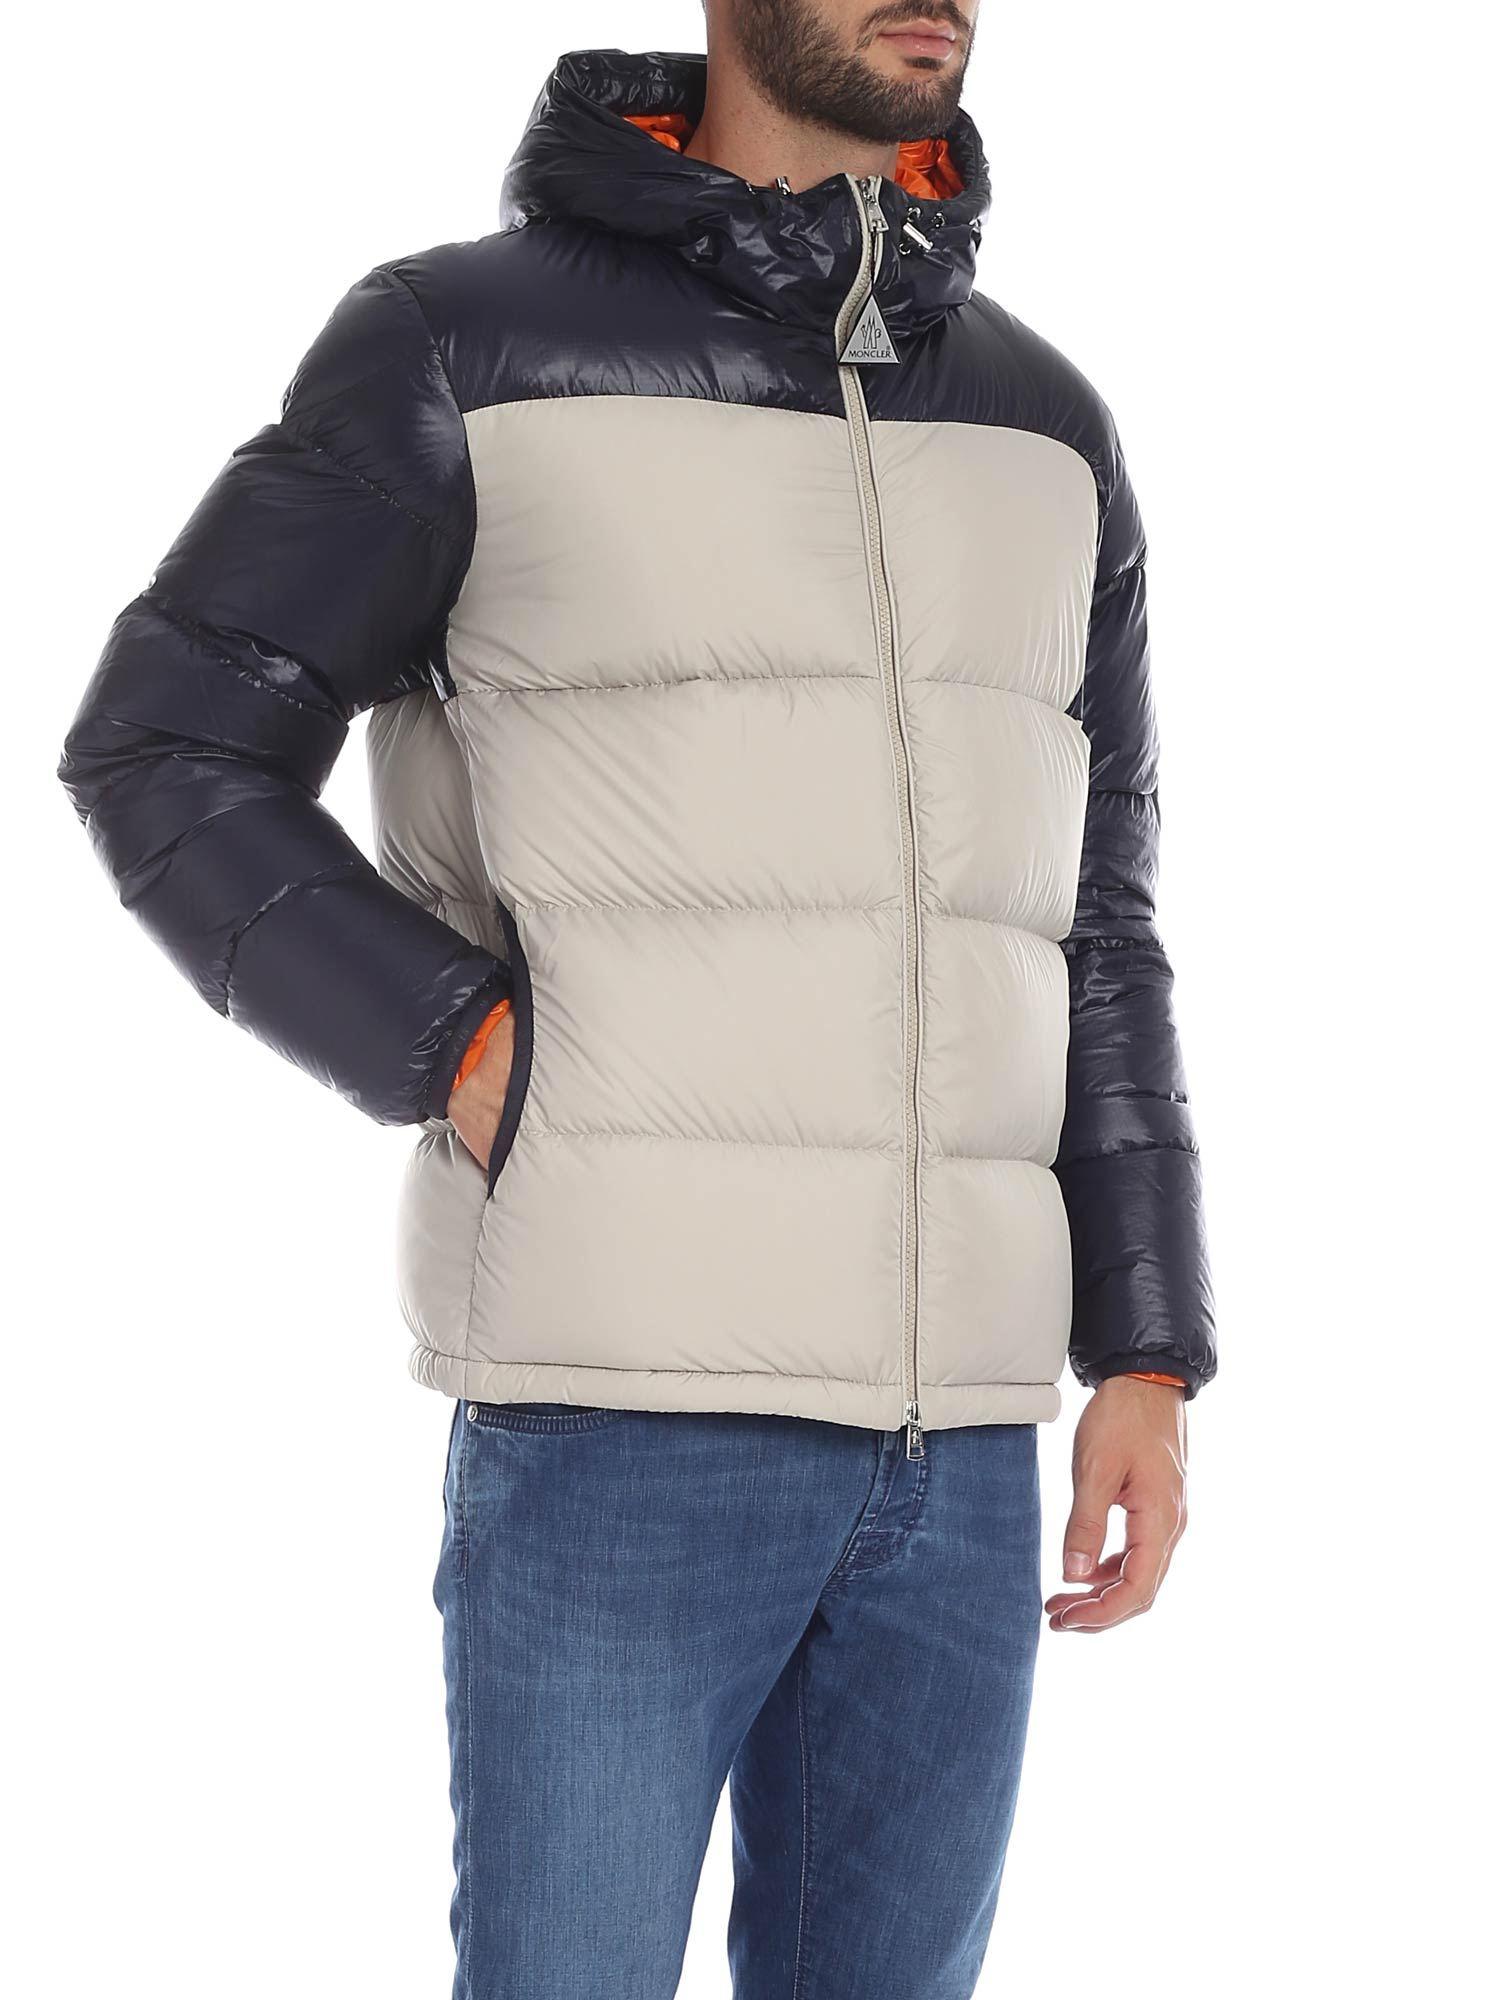 Moncler Synthetic Latour Down Jacket In Blue And Ice Color for Men - Lyst